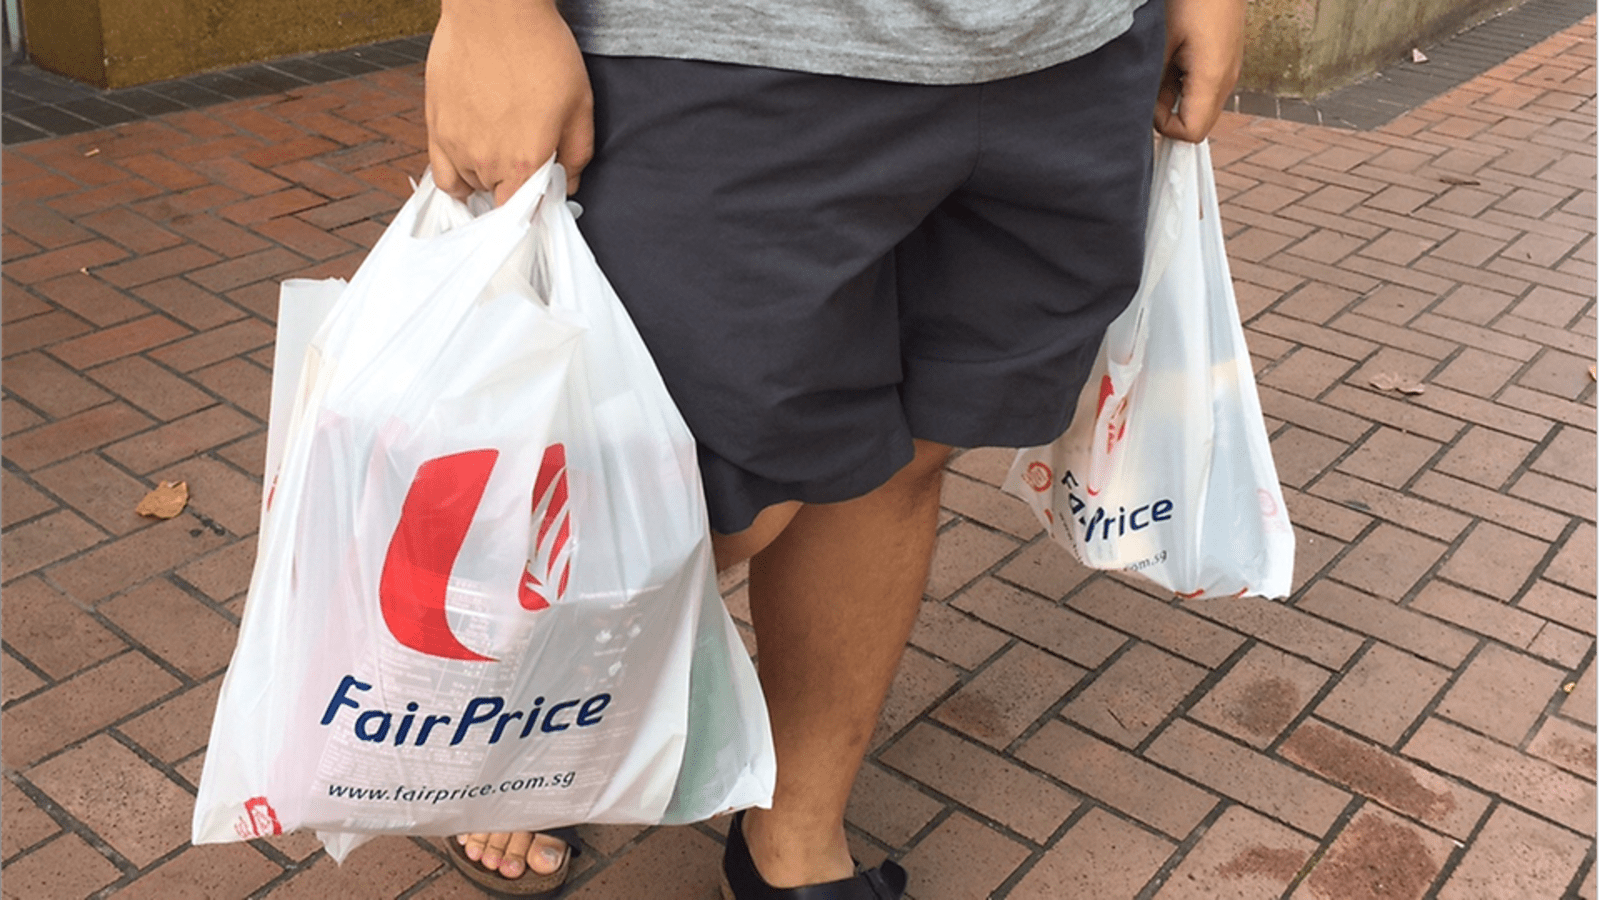 NEA seeks public feedback on proposal for supermarkets to charge for plastic bags from next year